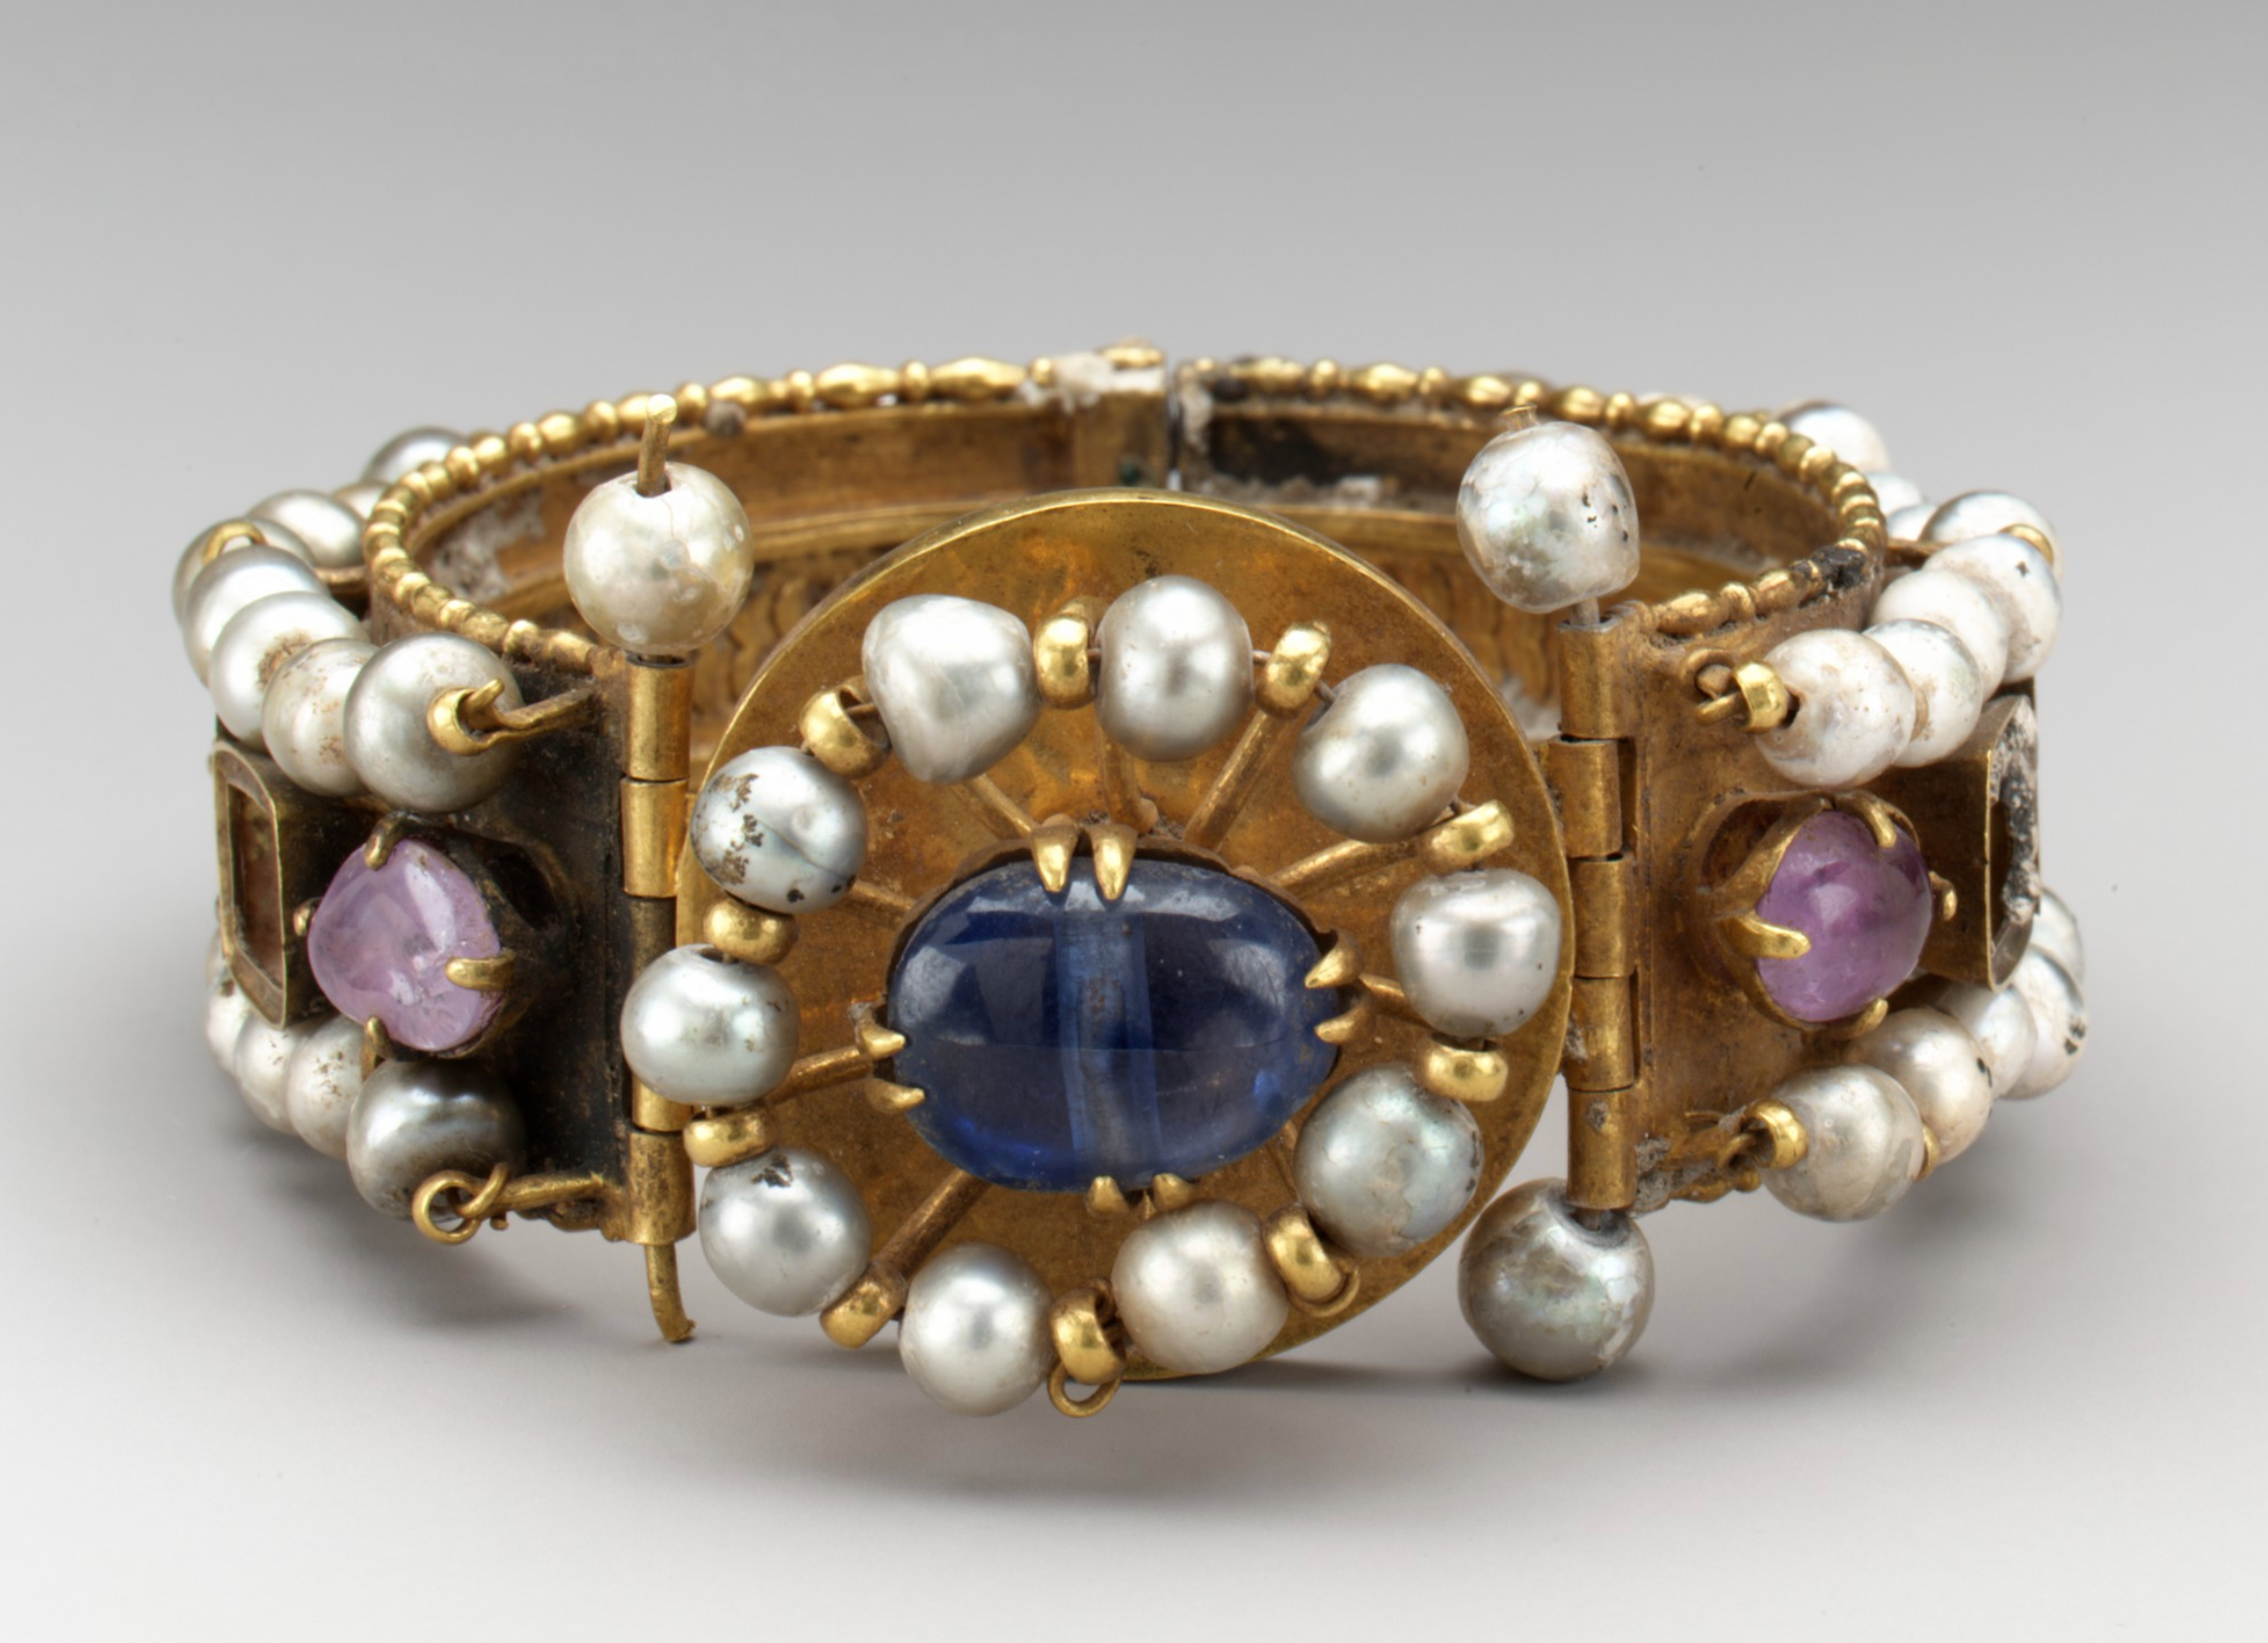 Byzantine bracelet (one of a pair), made in Constantinople, 500-700, etropolitan Museum of Art